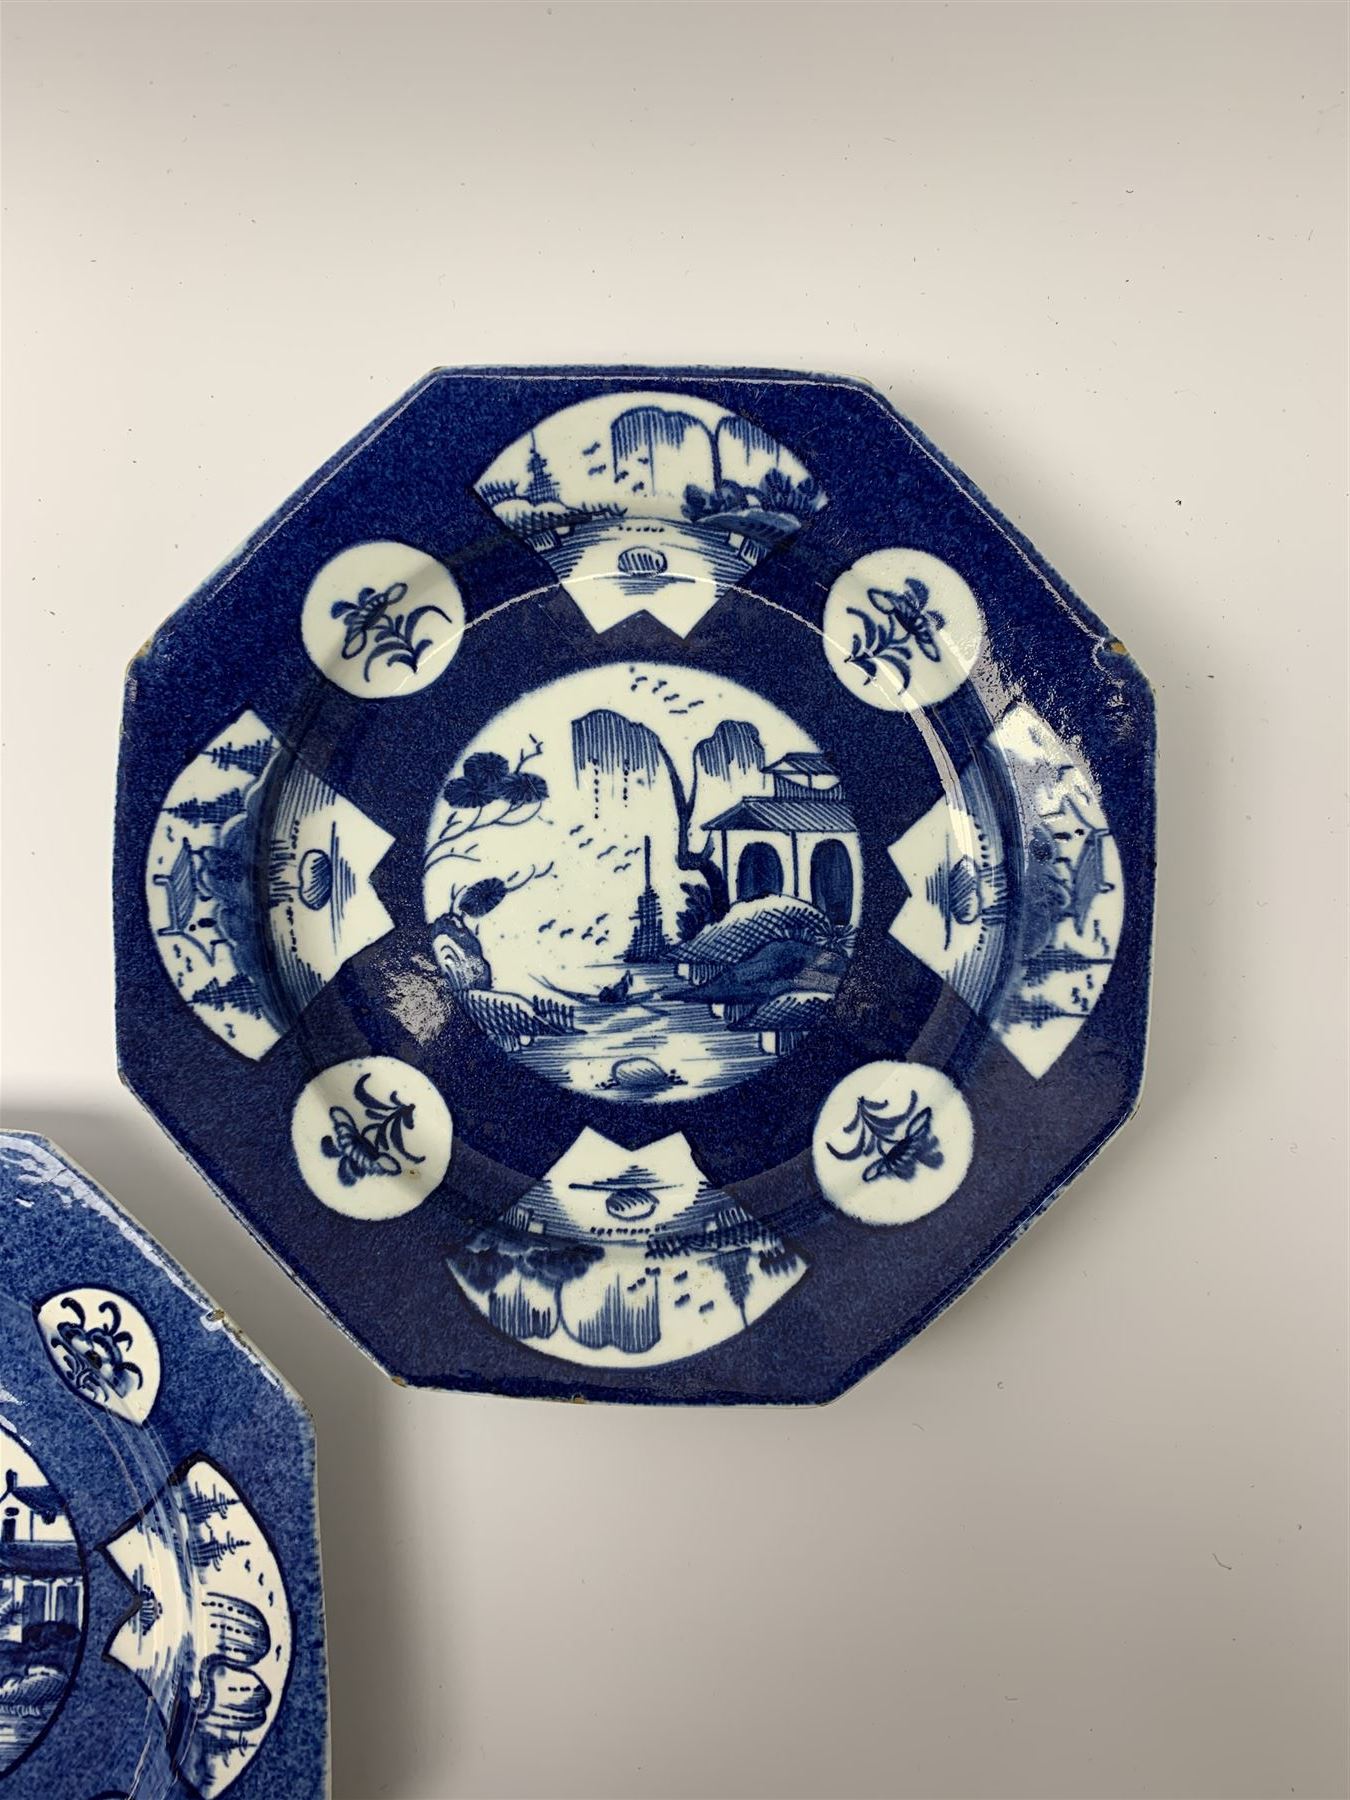 Mid 18th century Bow porcelain plate - Image 3 of 8